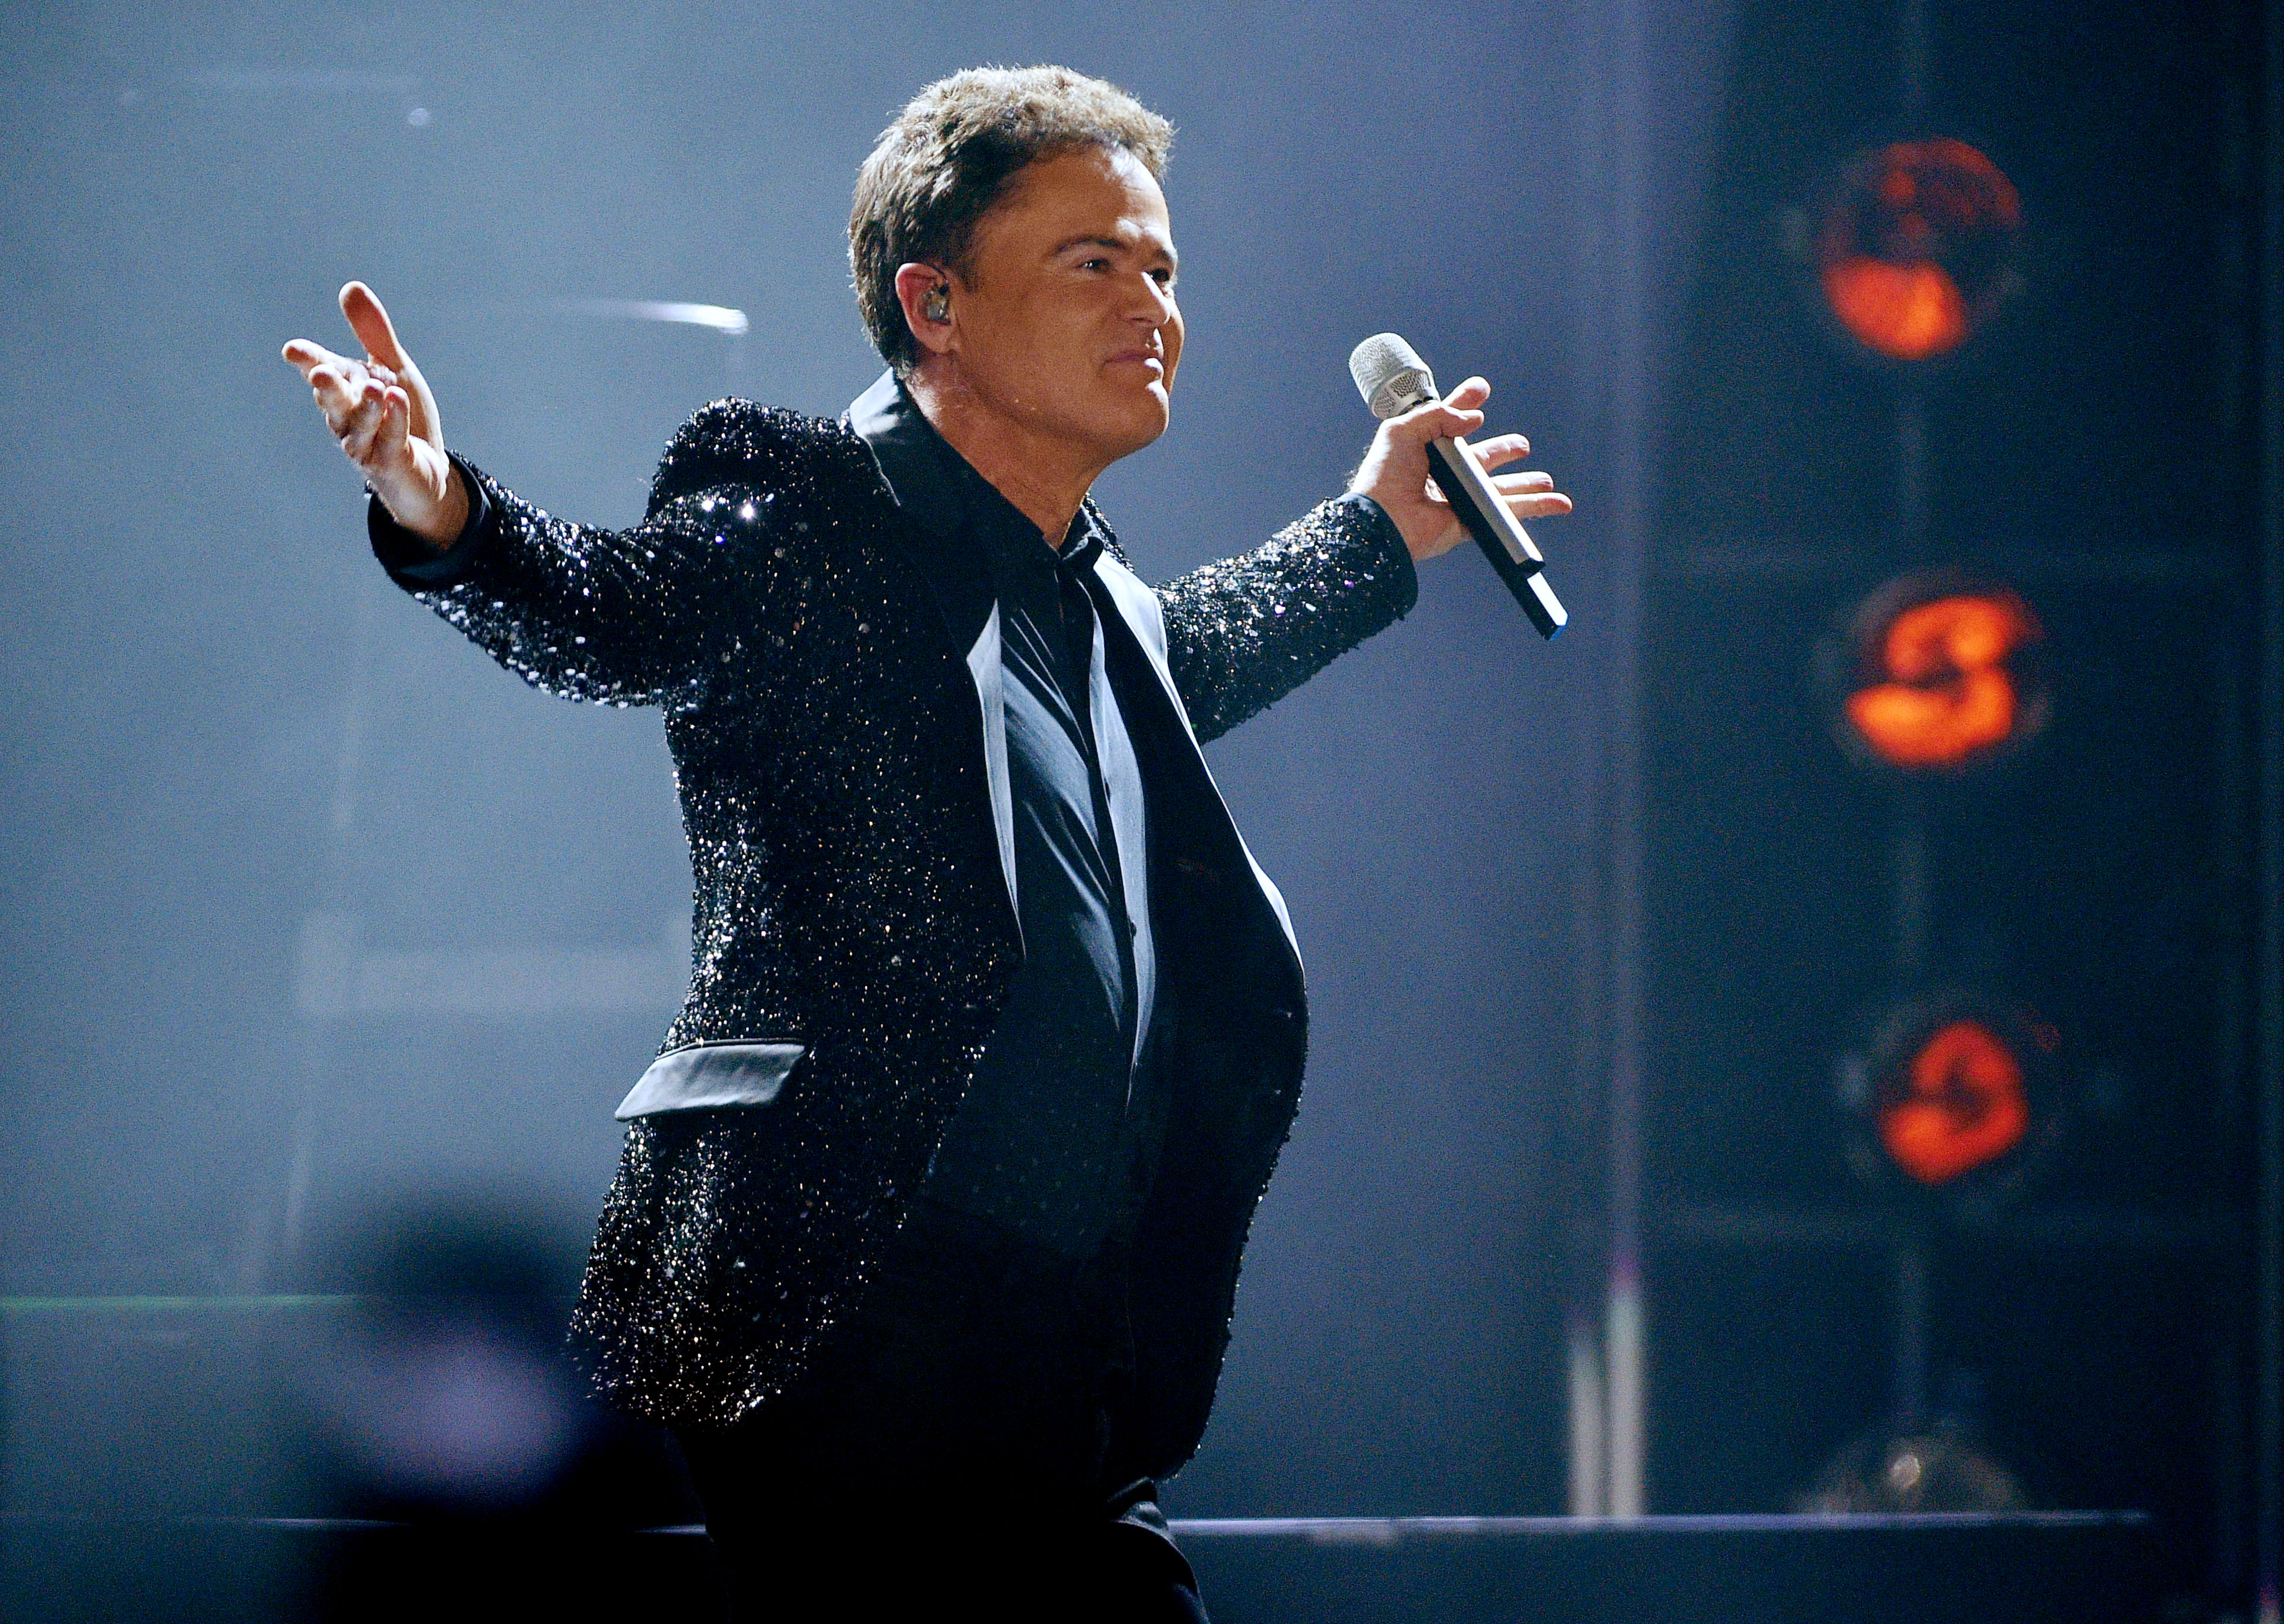 Donny Osmond 'Taking a Lot of Time Off' to Work on New Music Solo